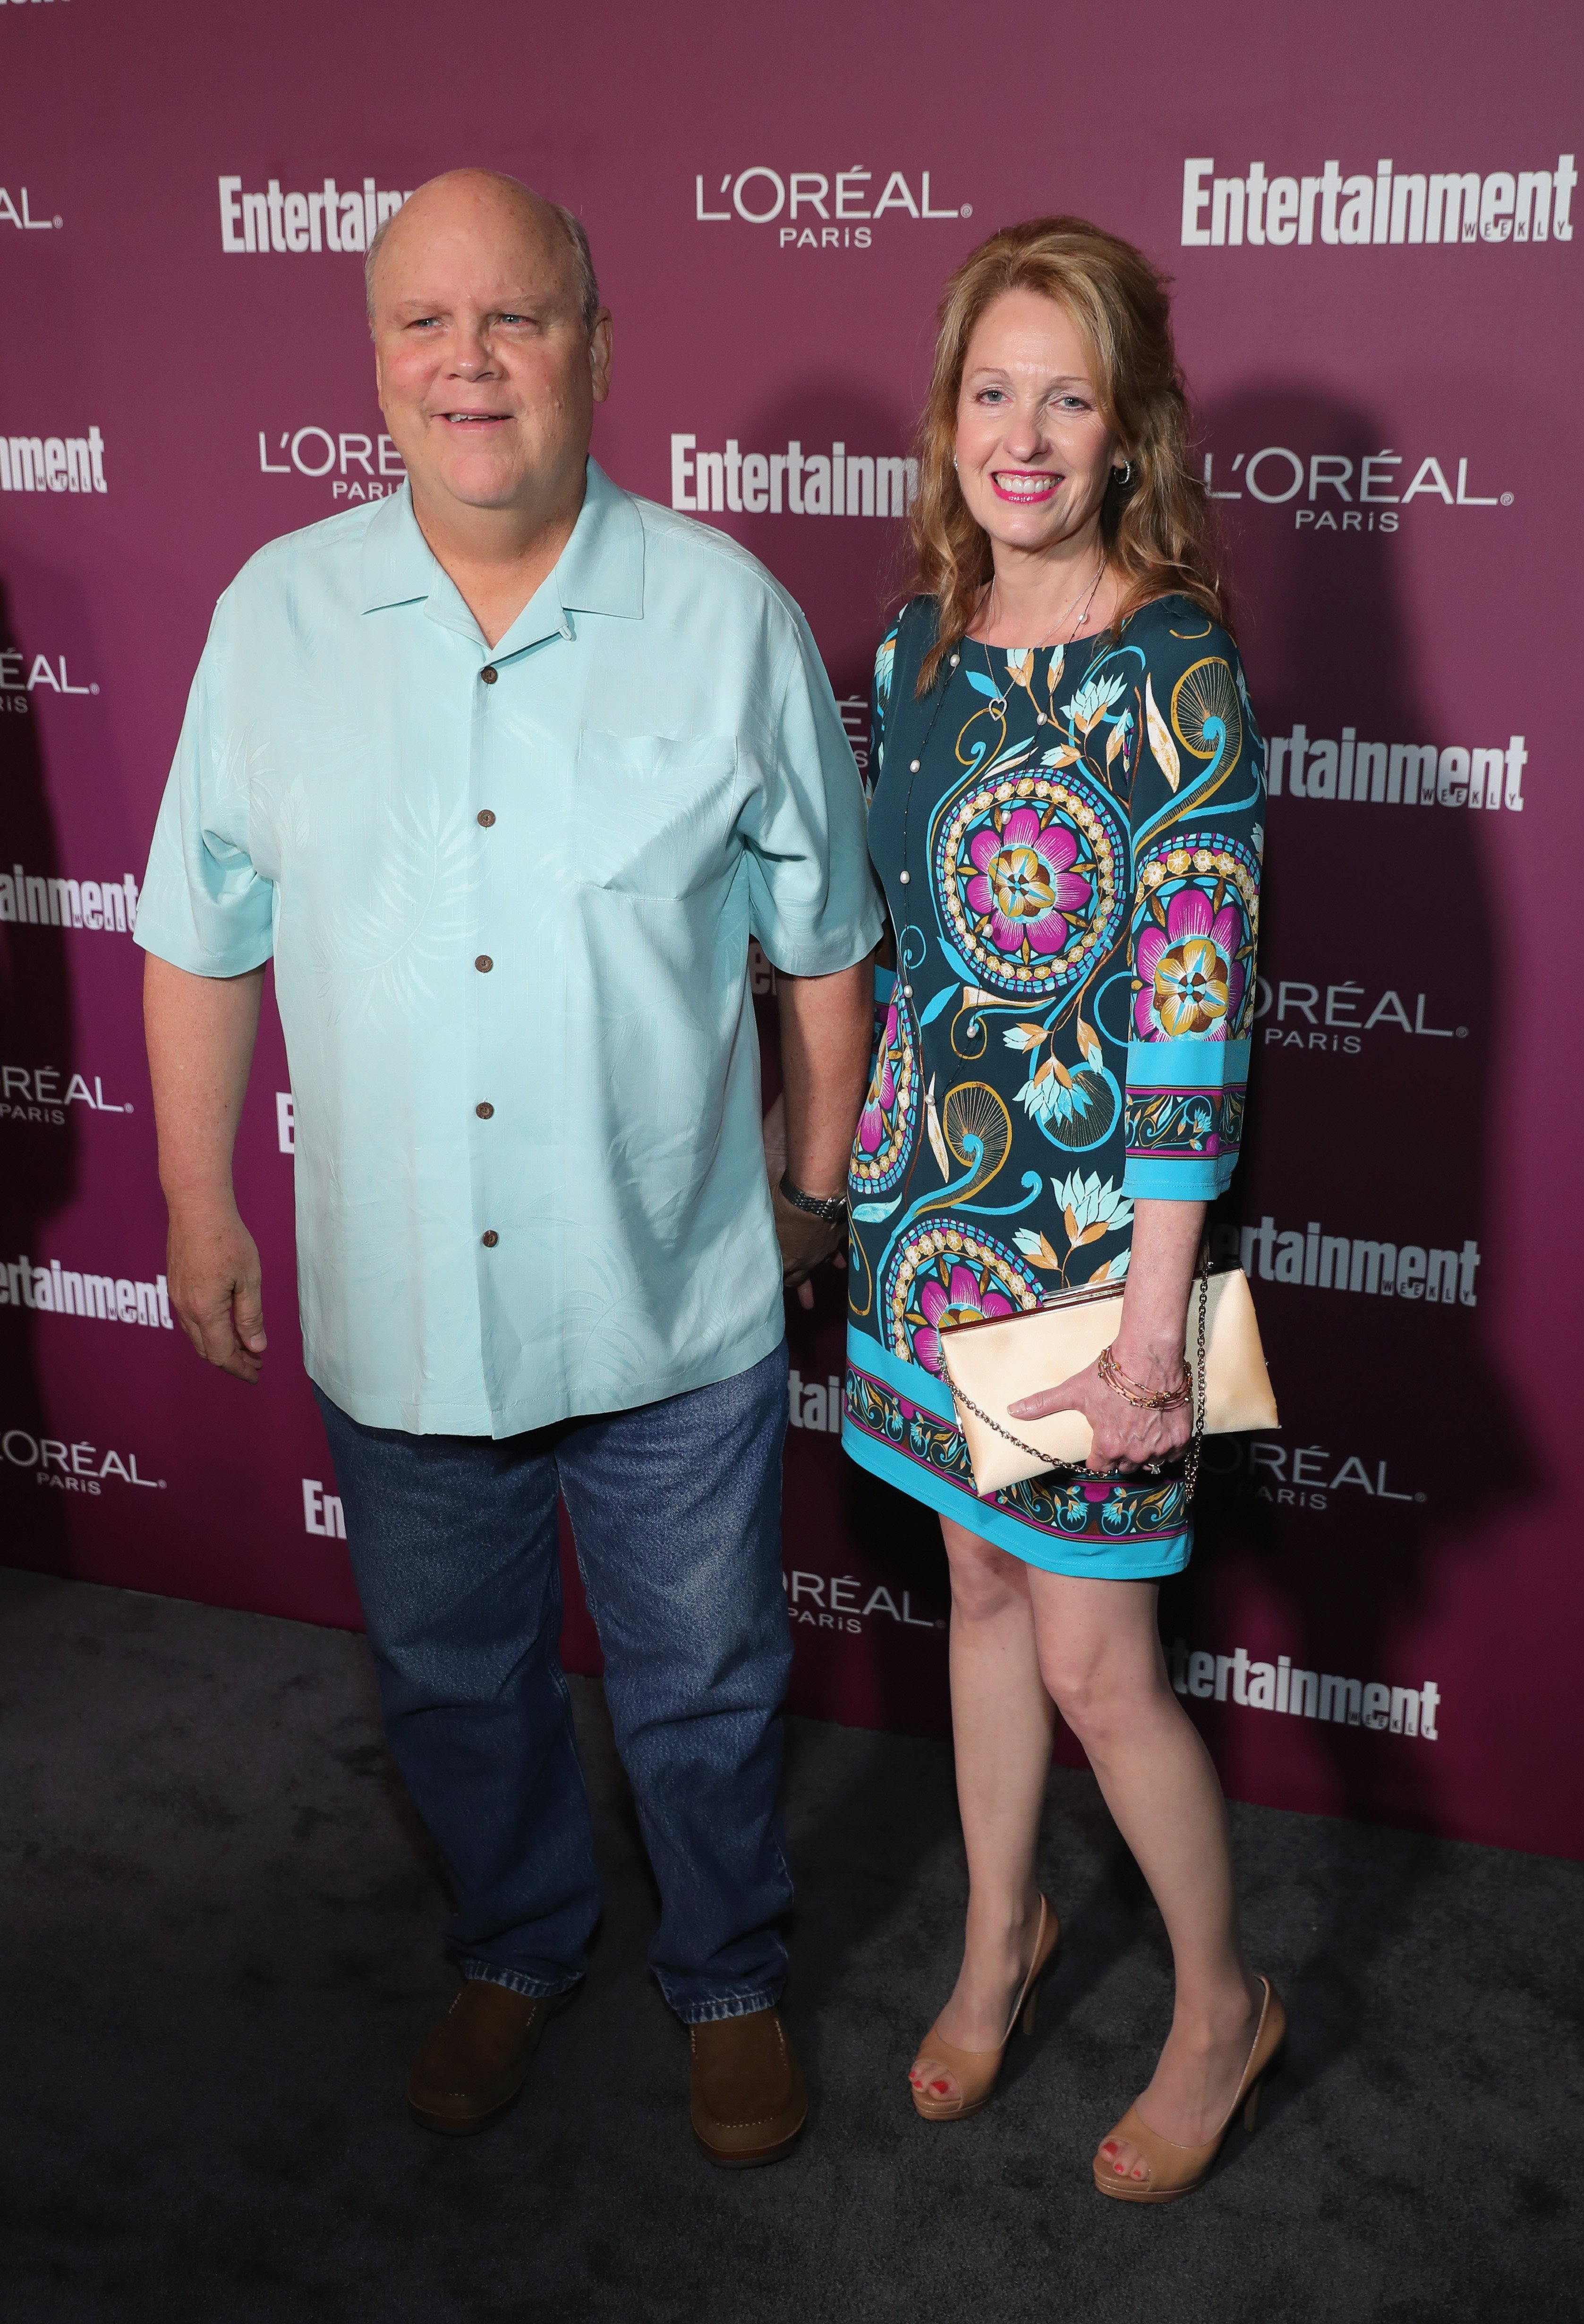 Dirk Blockerand Danielle Aubuchon attend the 2017 Entertainment Weekly Pre-Emmy Party | Source: Getty Images